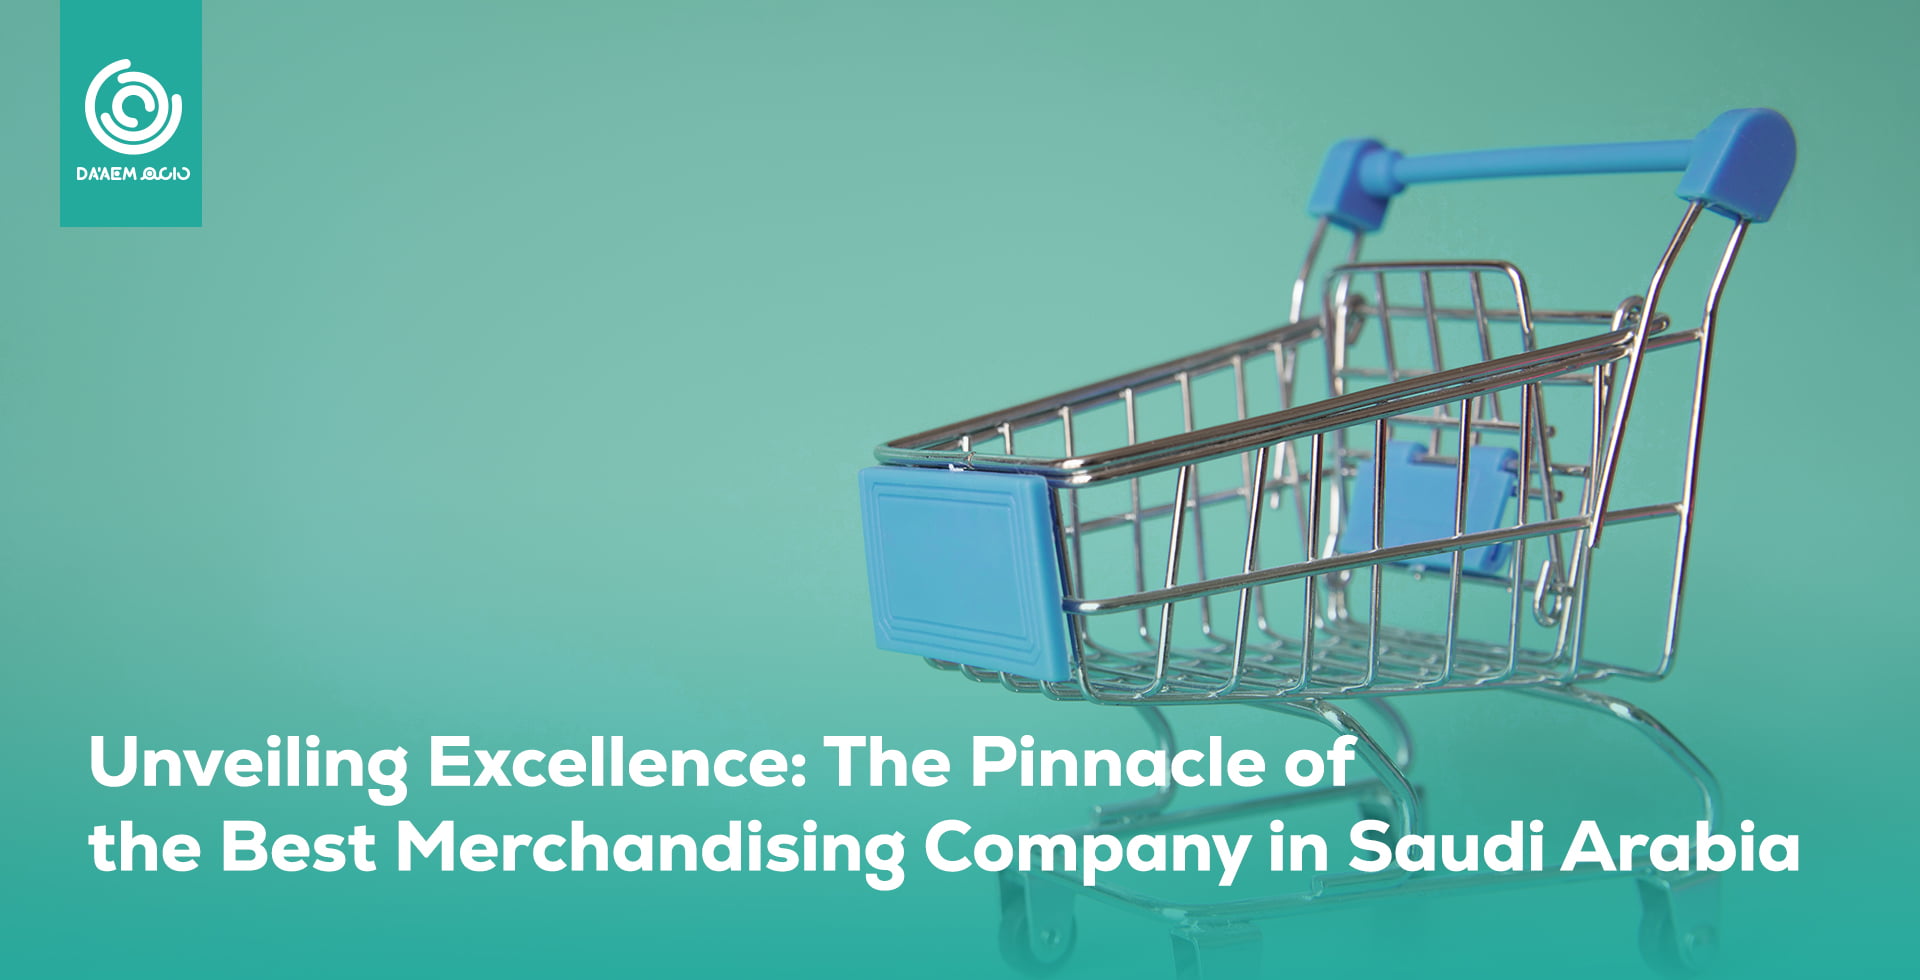 Unveiling Excellence: The Pinnacle of the Best Merchandising Company in Saudi Arabia